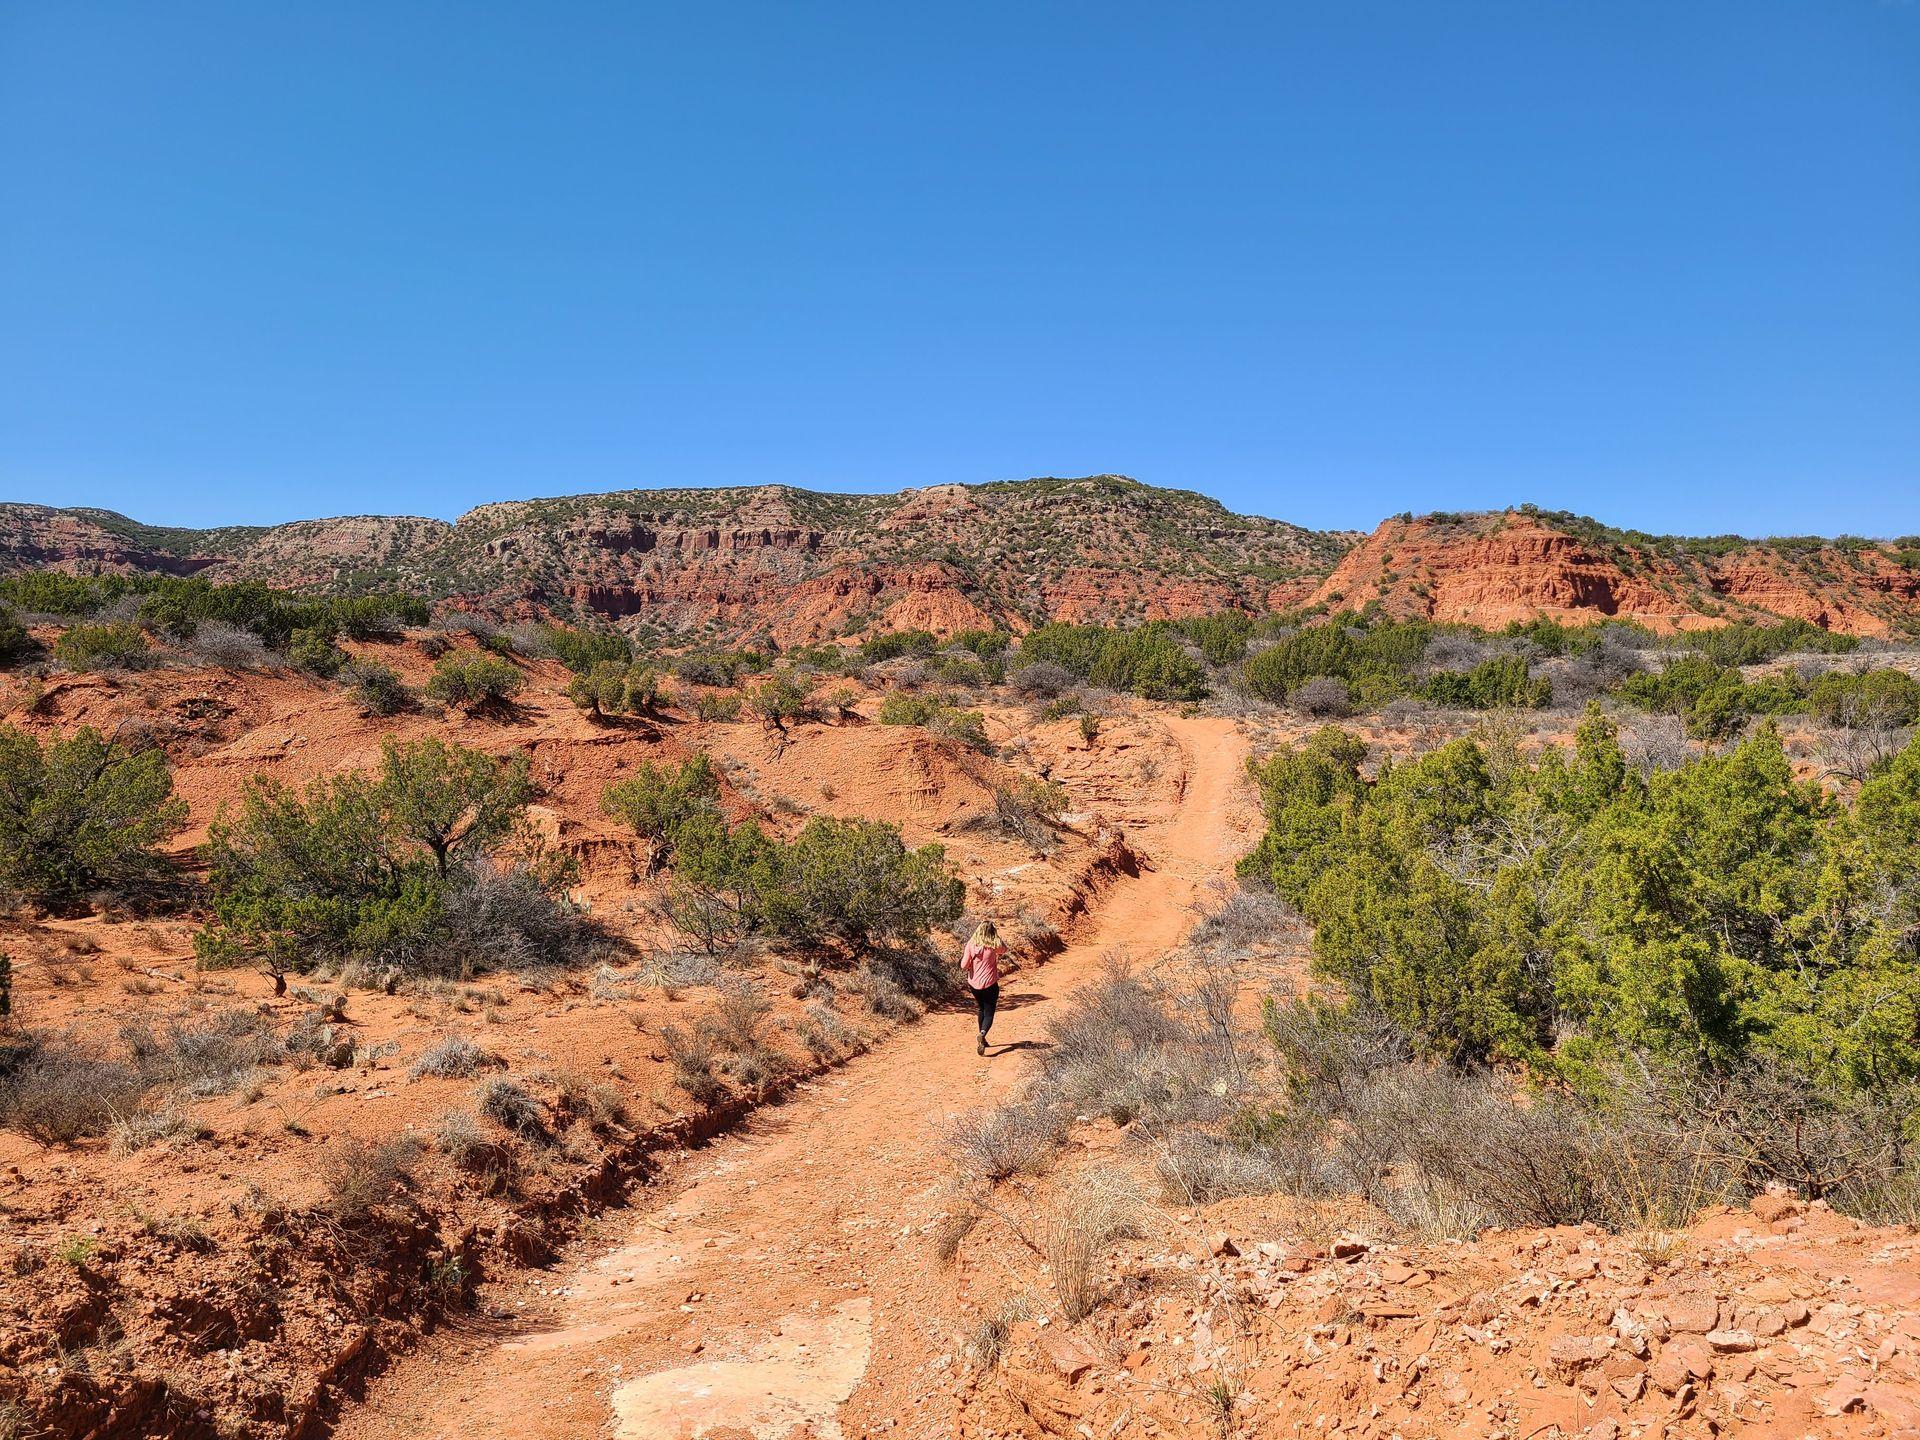 Lydia hiking on a trail surrounded by orange rocks at Caprock Canyons State Park.